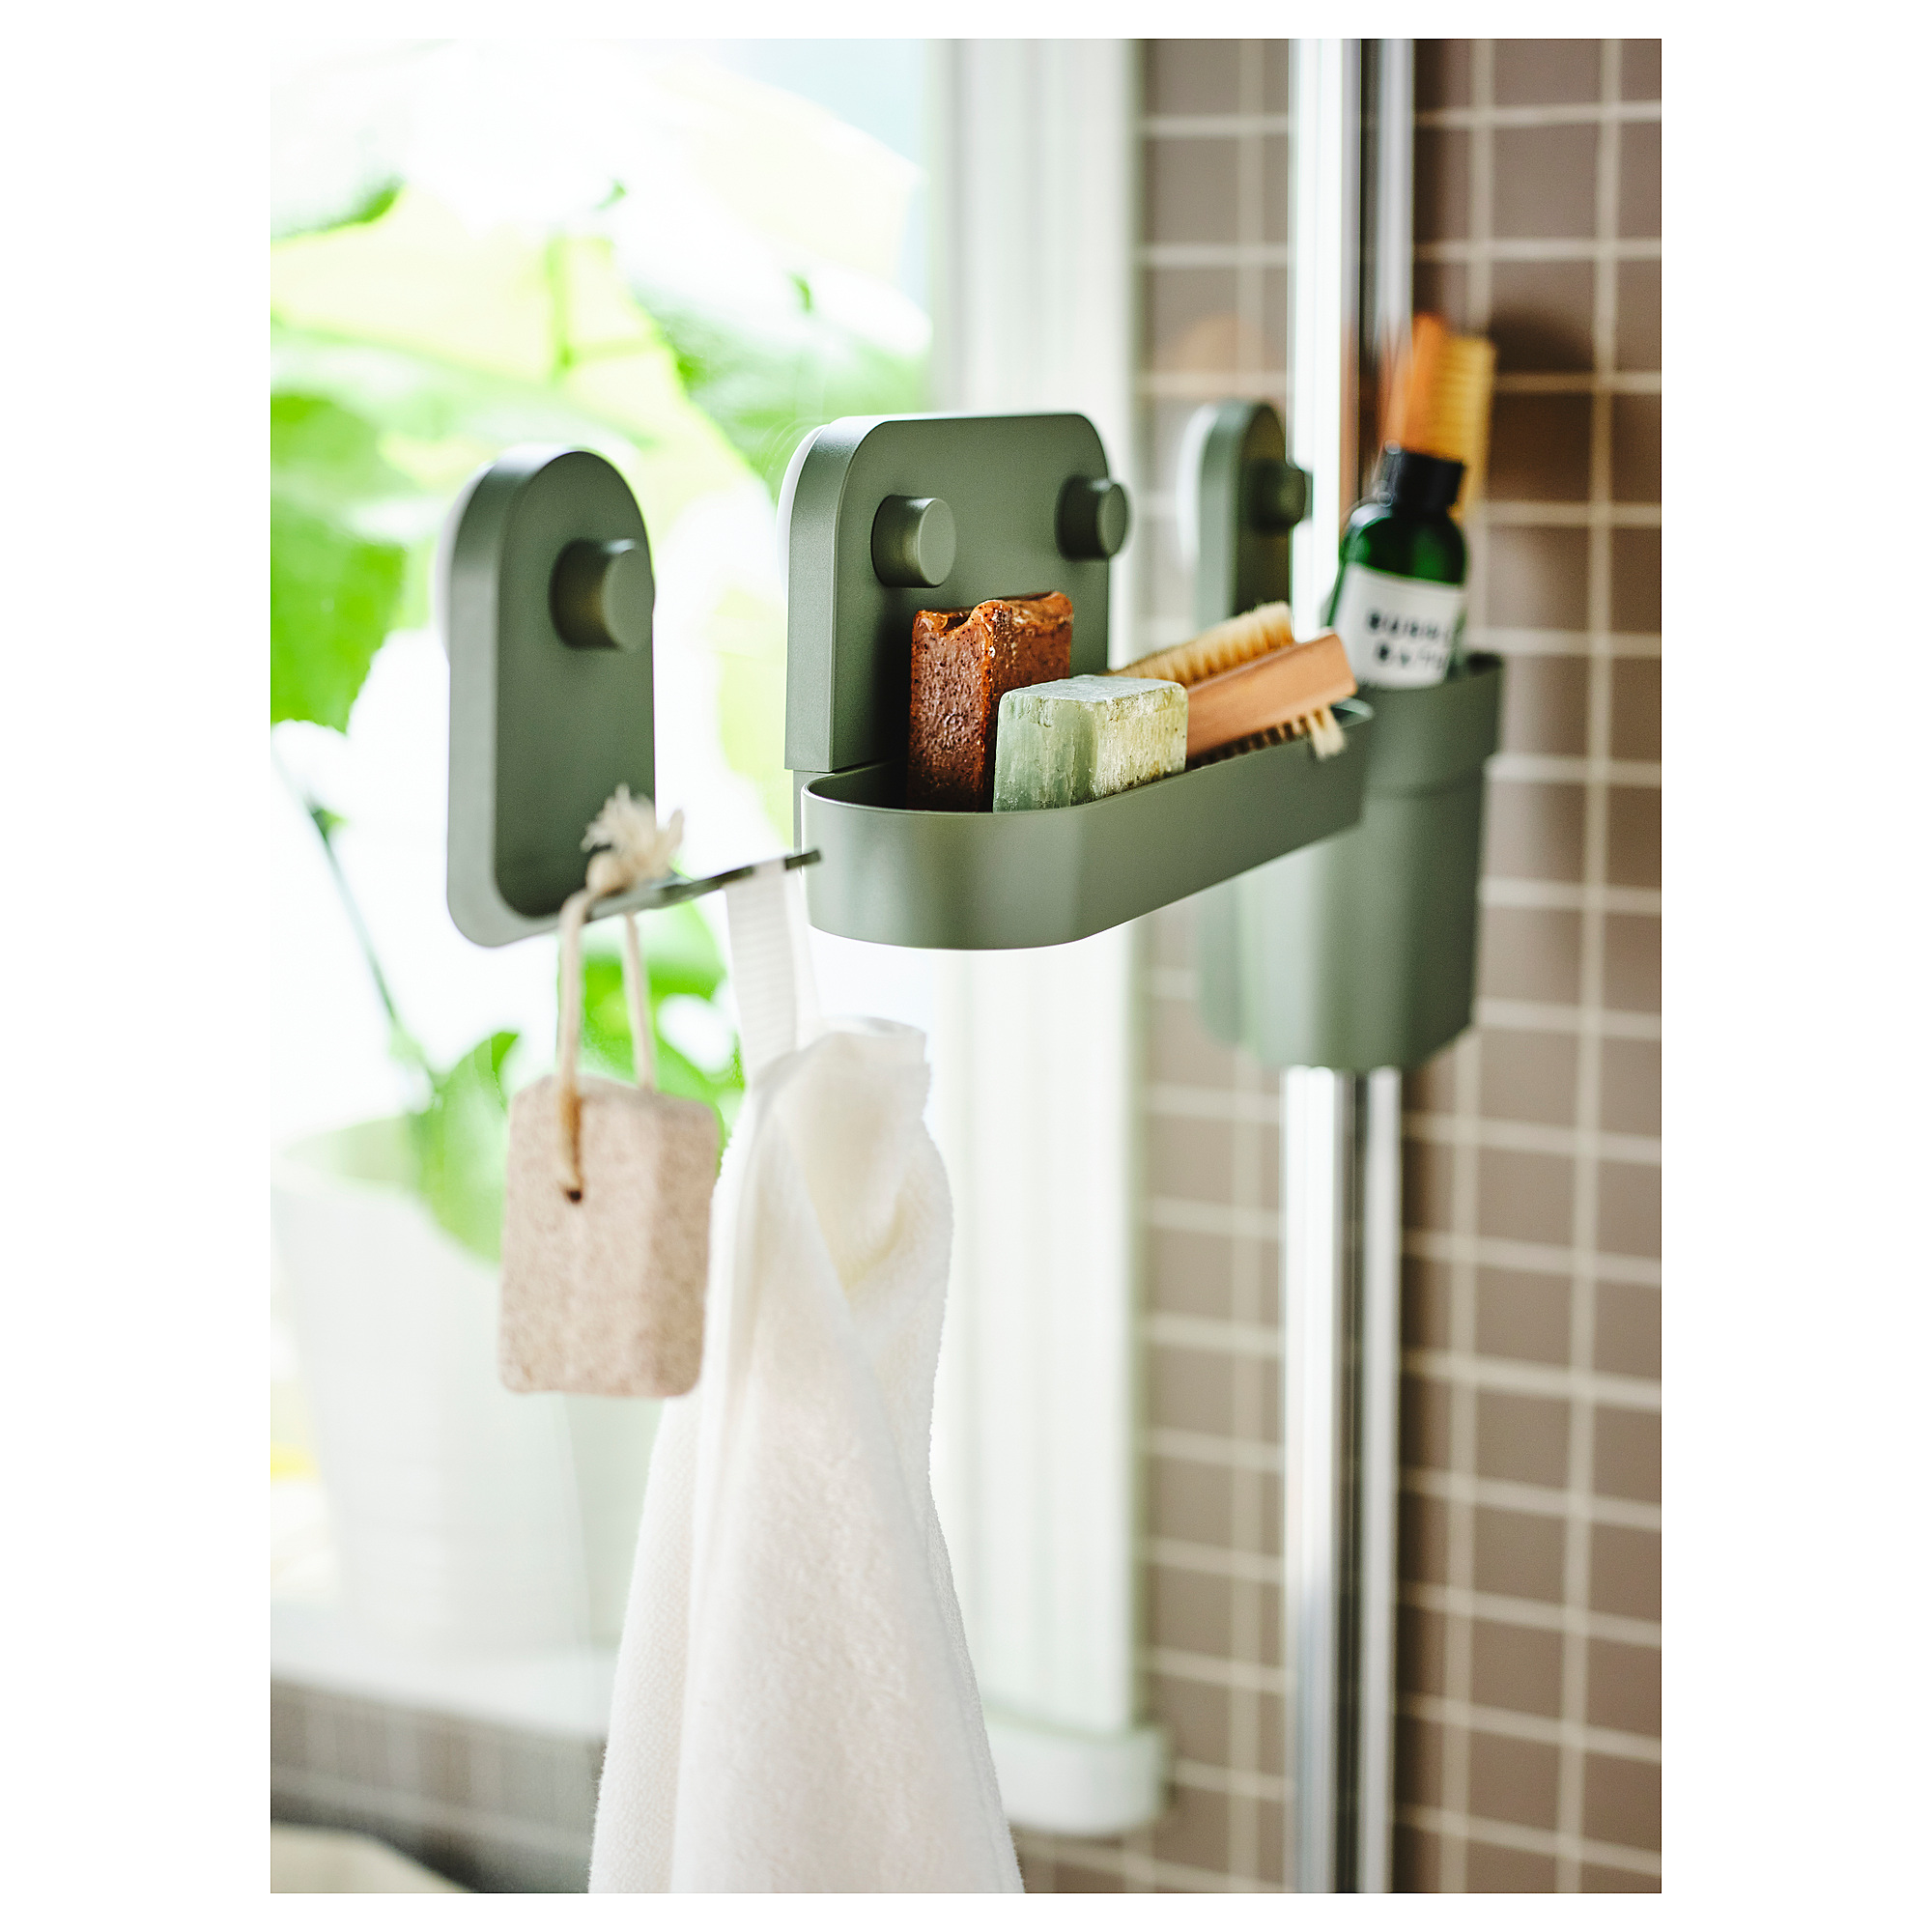 ÖBONÄS wall shelf with suction cup